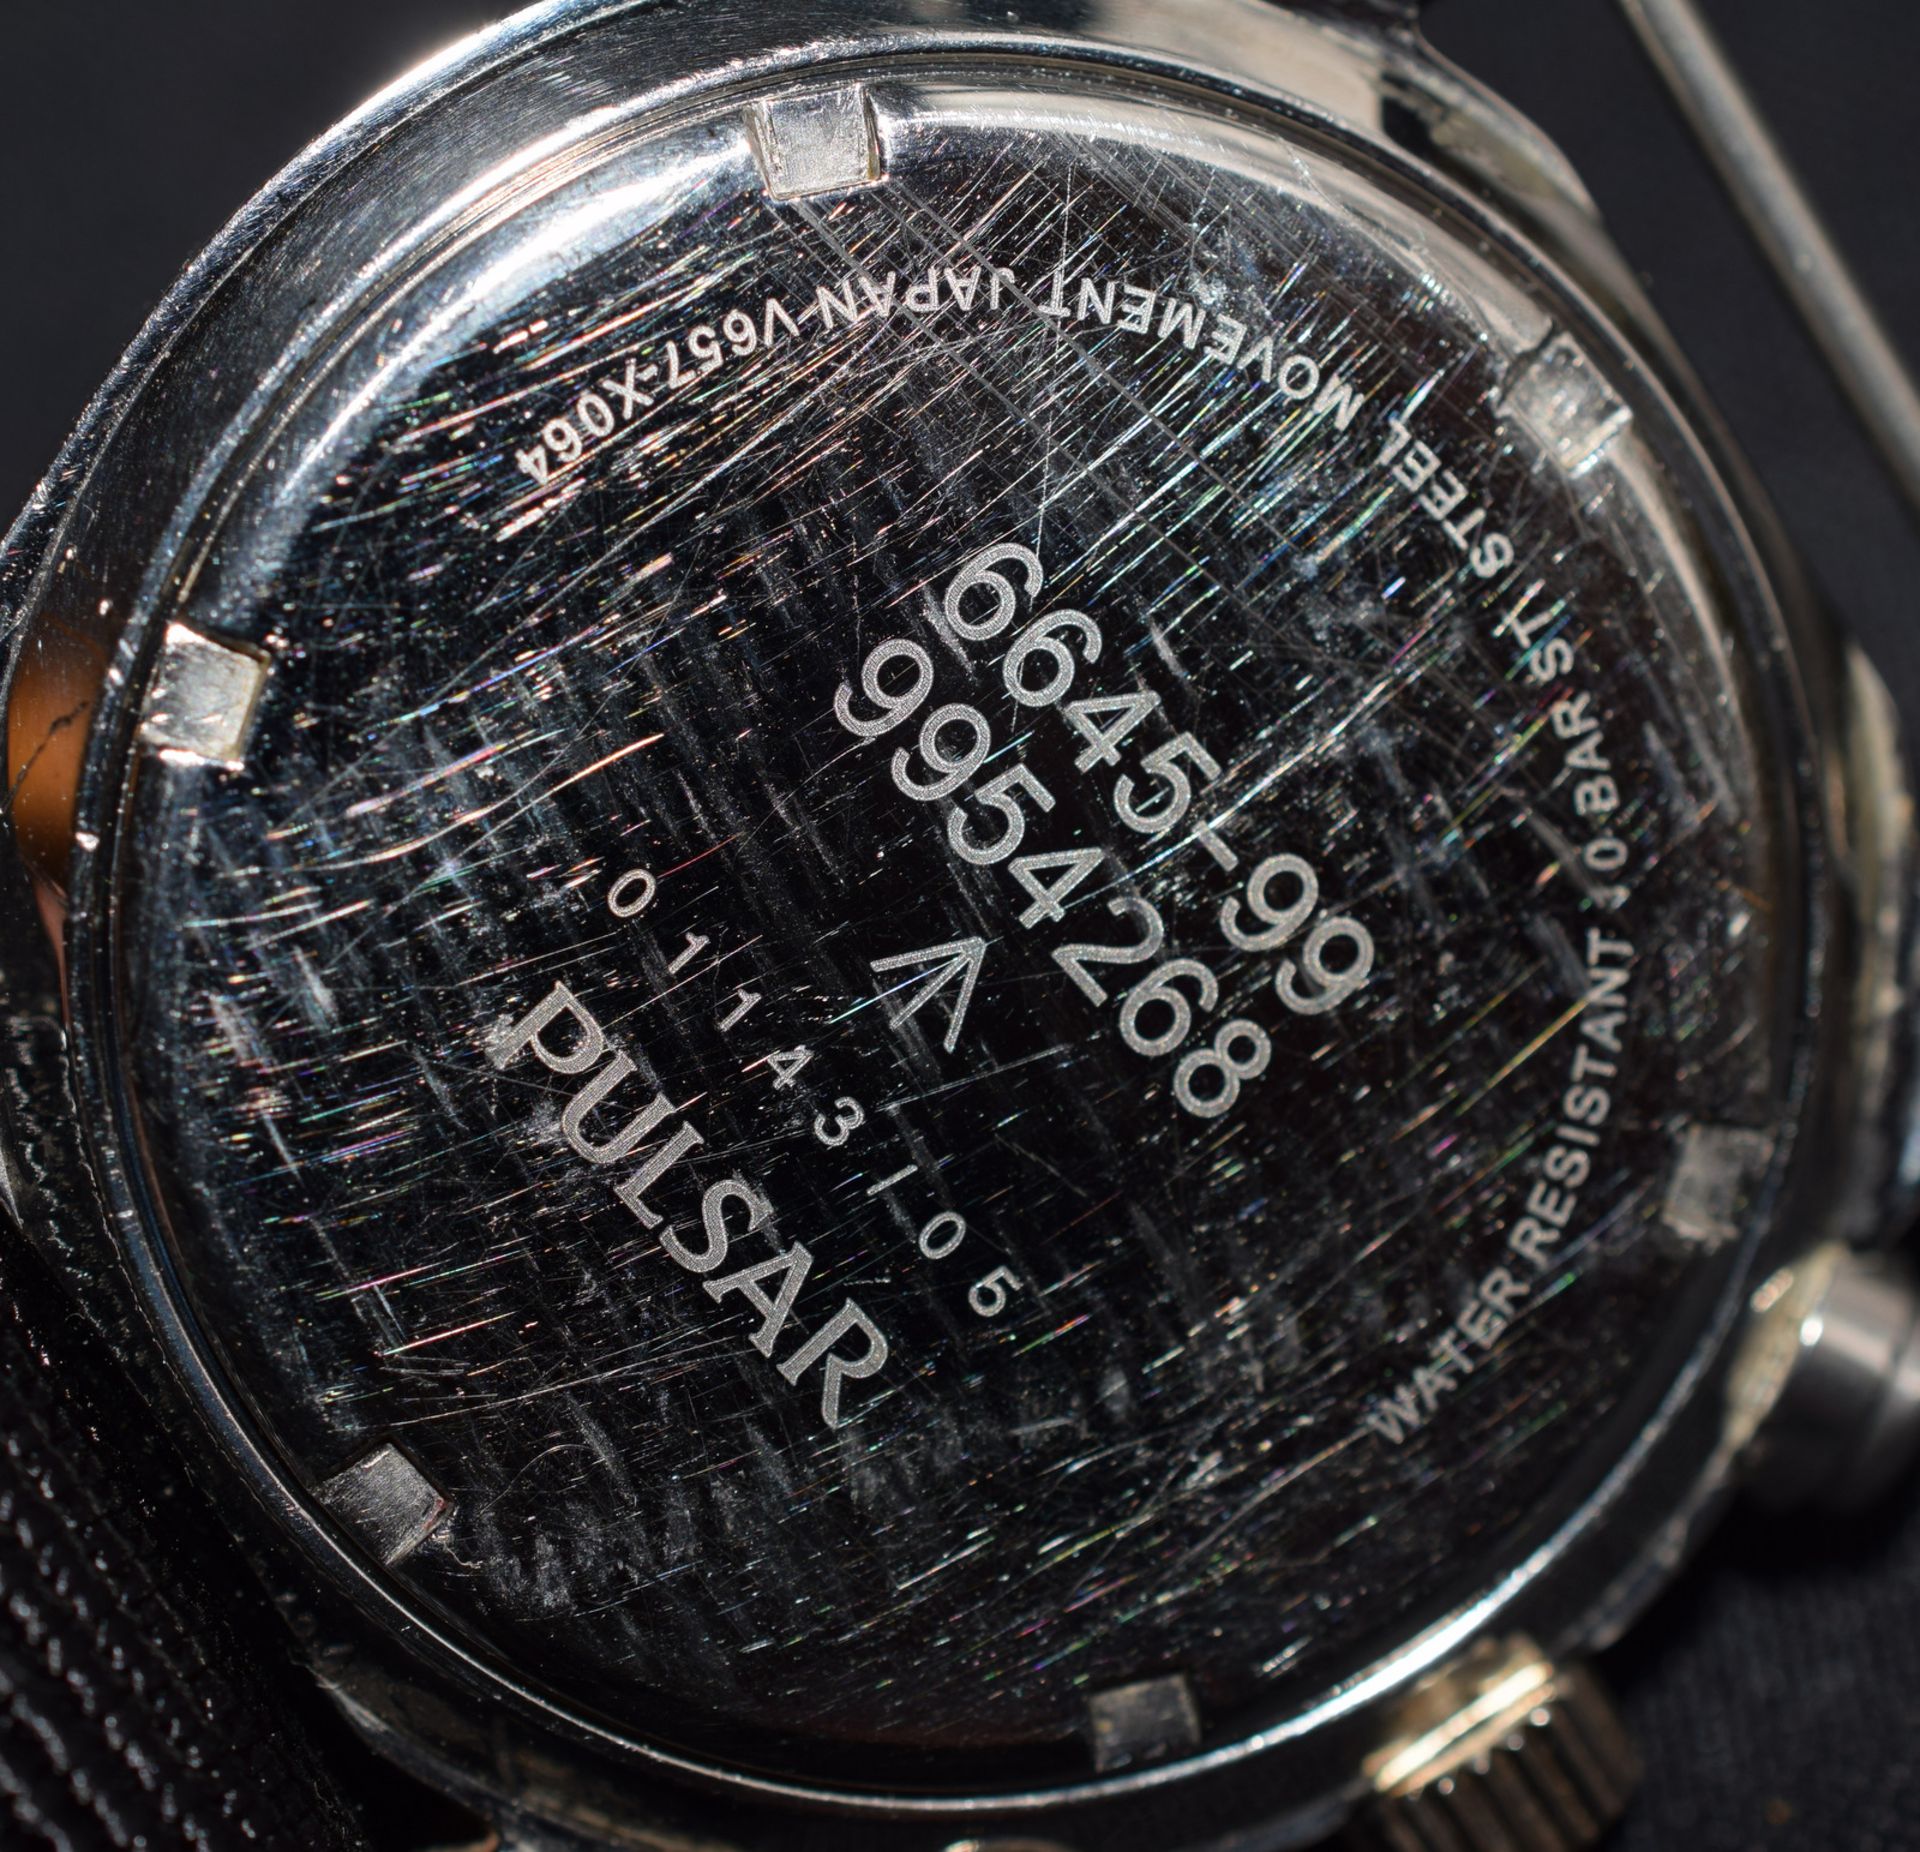 Excellent Military Pulsar Chronograph circa 2005 - Image 7 of 7